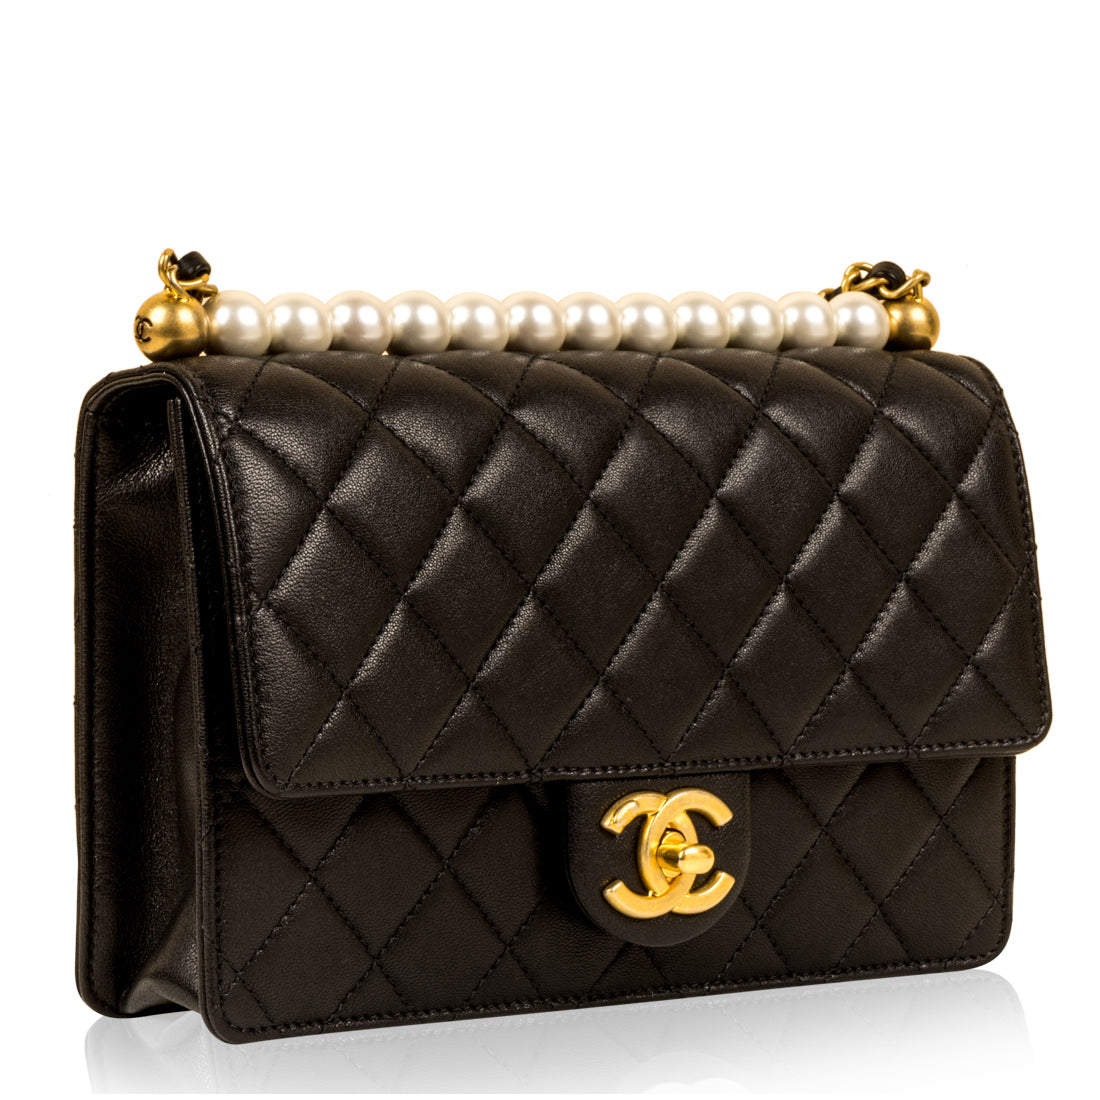 Chanel SS19 Flap Bag With Pearls  BAGAHOLICBOY